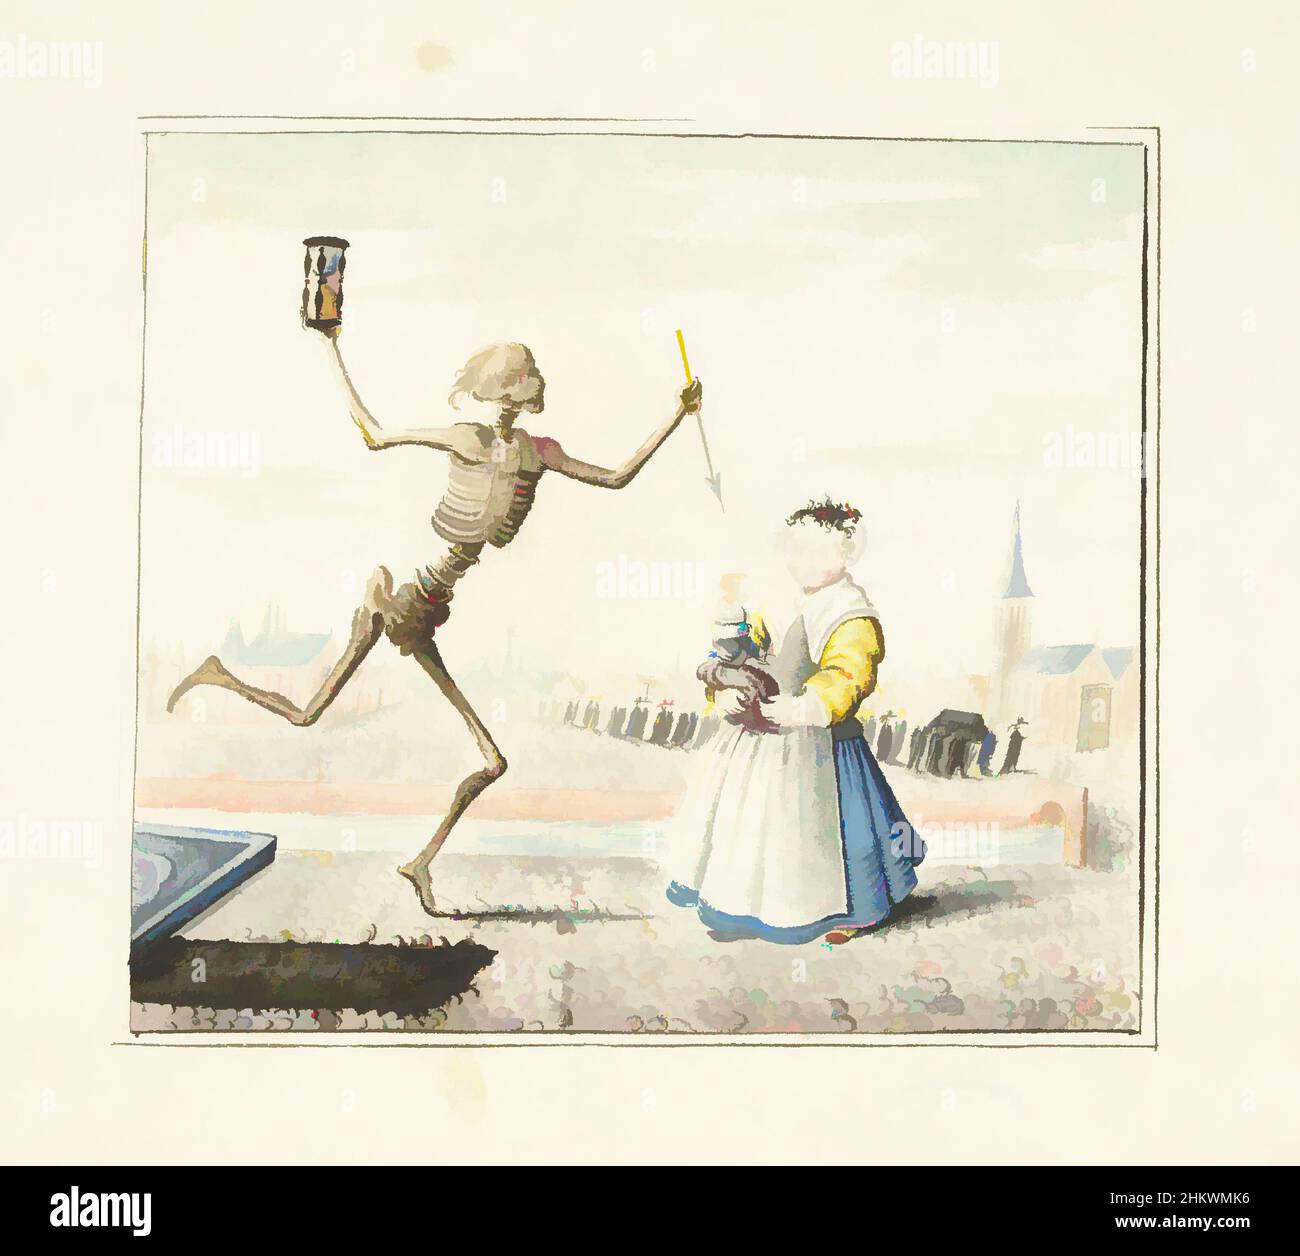 Art inspired by Death next to a little girl, Death dancing next to a girl. On the left foreground is the girl's grave with the date the drawing was made or when the girl died. On the right, a long funeral procession walks to the entrance of a church., draughtsman: Gesina ter Borch, Classic works modernized by Artotop with a splash of modernity. Shapes, color and value, eye-catching visual impact on art. Emotions through freedom of artworks in a contemporary way. A timeless message pursuing a wildly creative new direction. Artists turning to the digital medium and creating the Artotop NFT Stock Photo